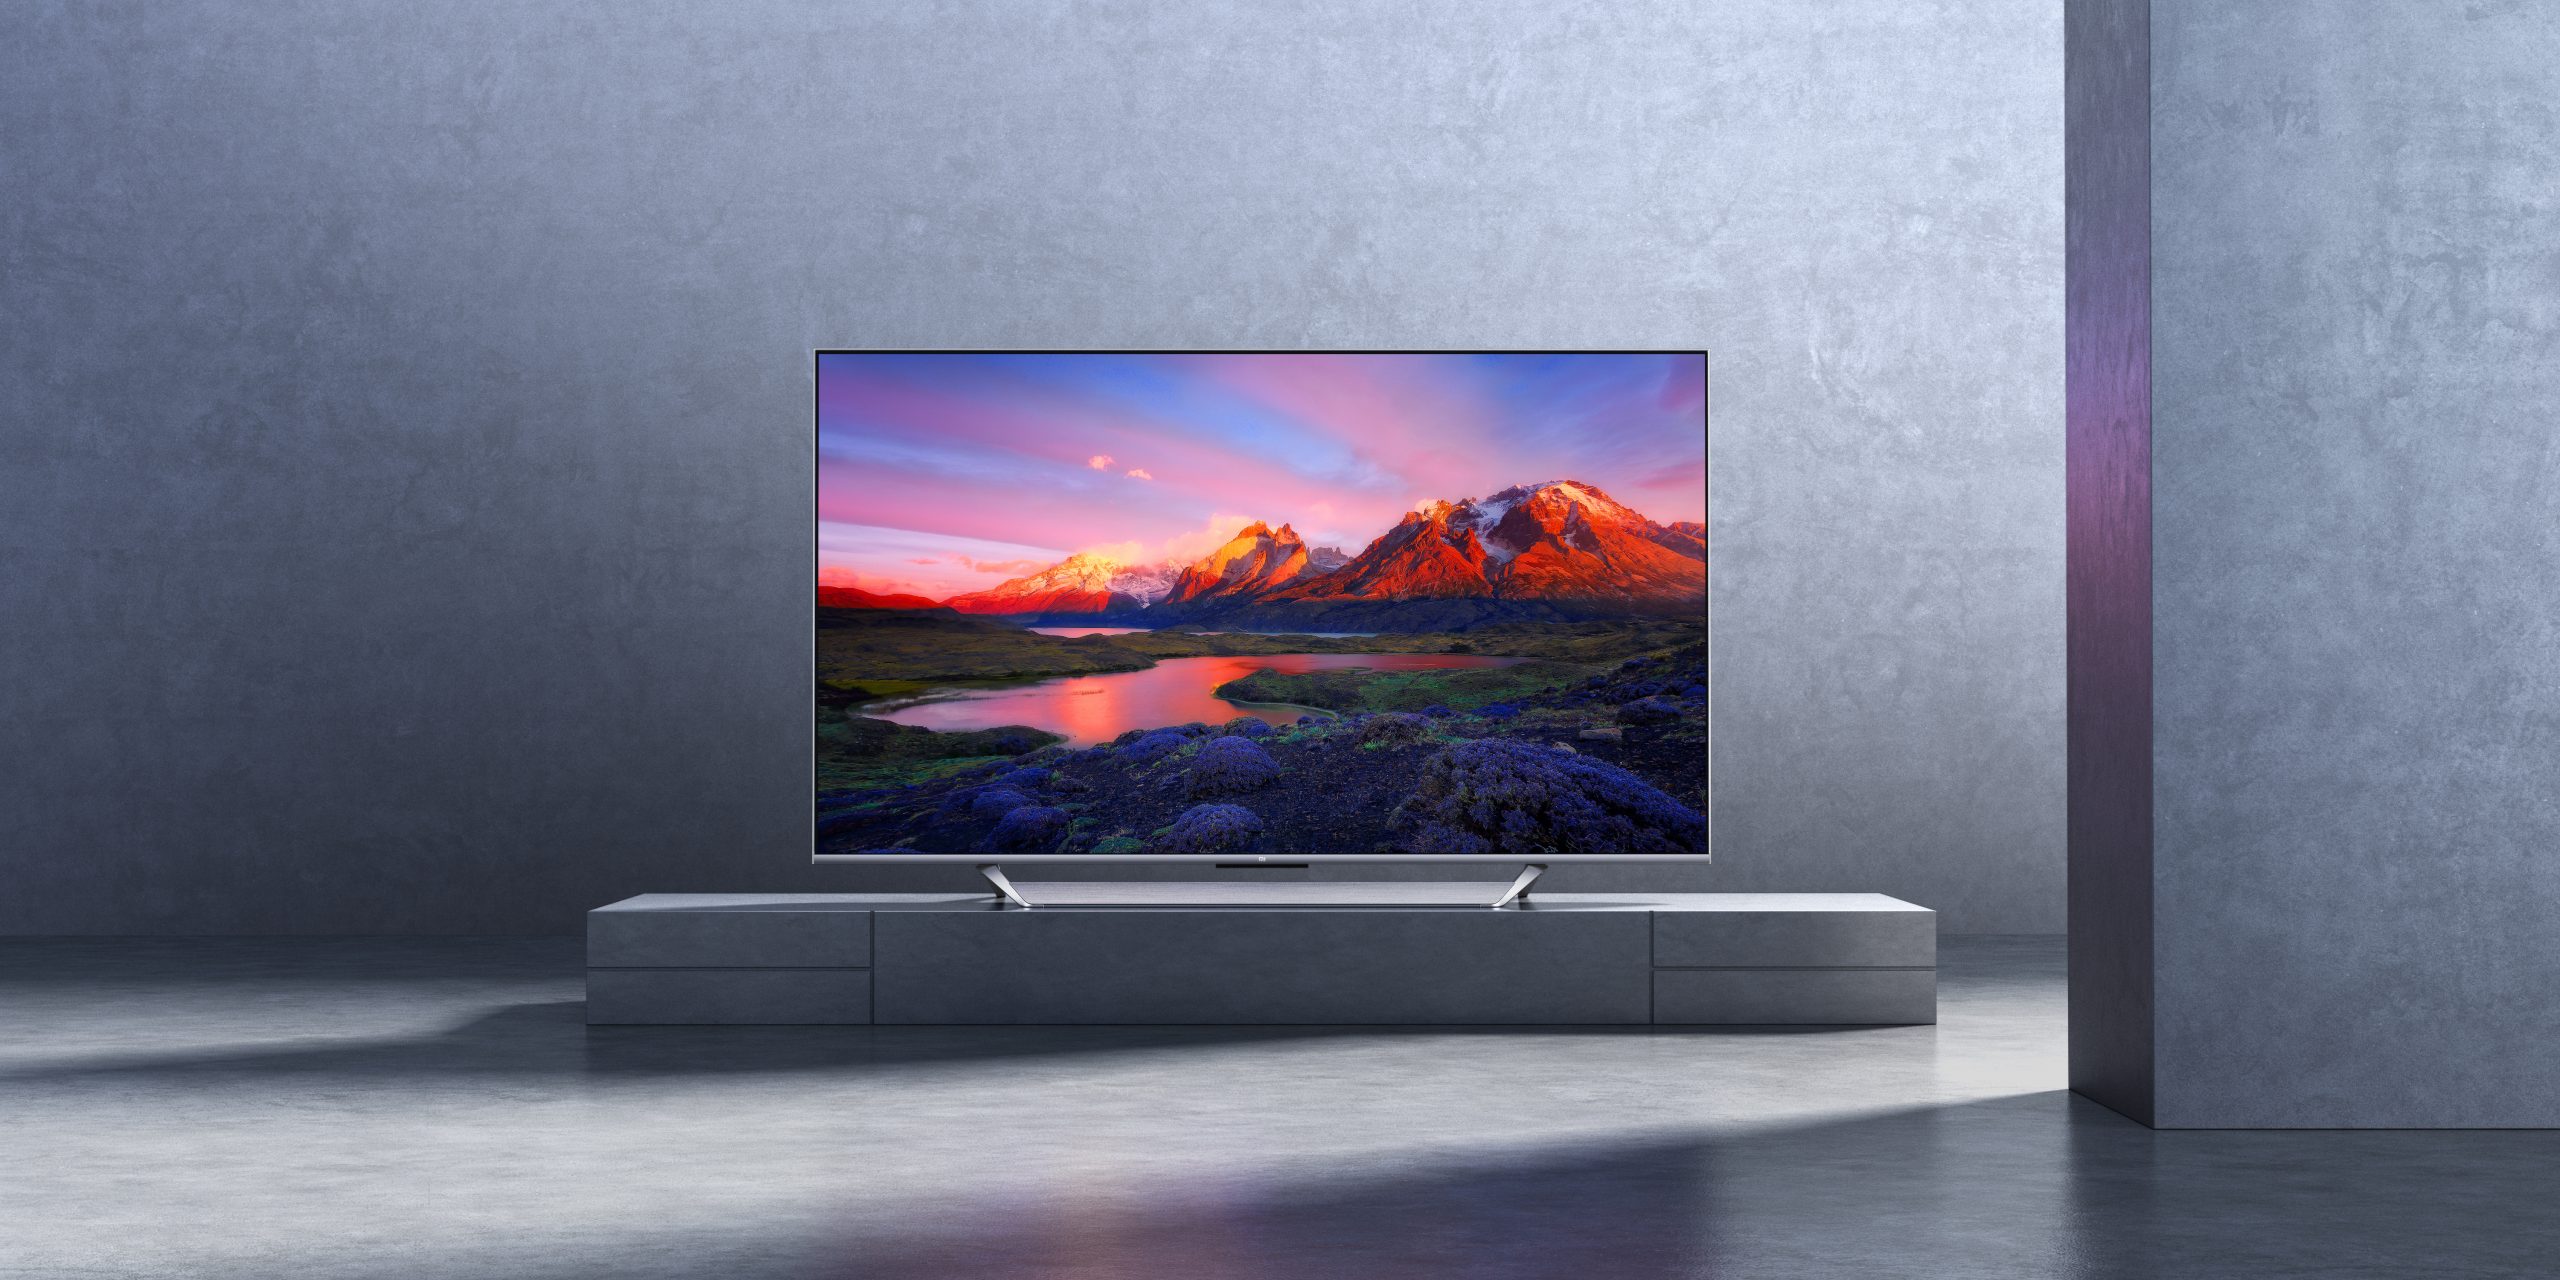 Mi TV Q1 and Mi TV P1 series announced: Price starts from RM899 3